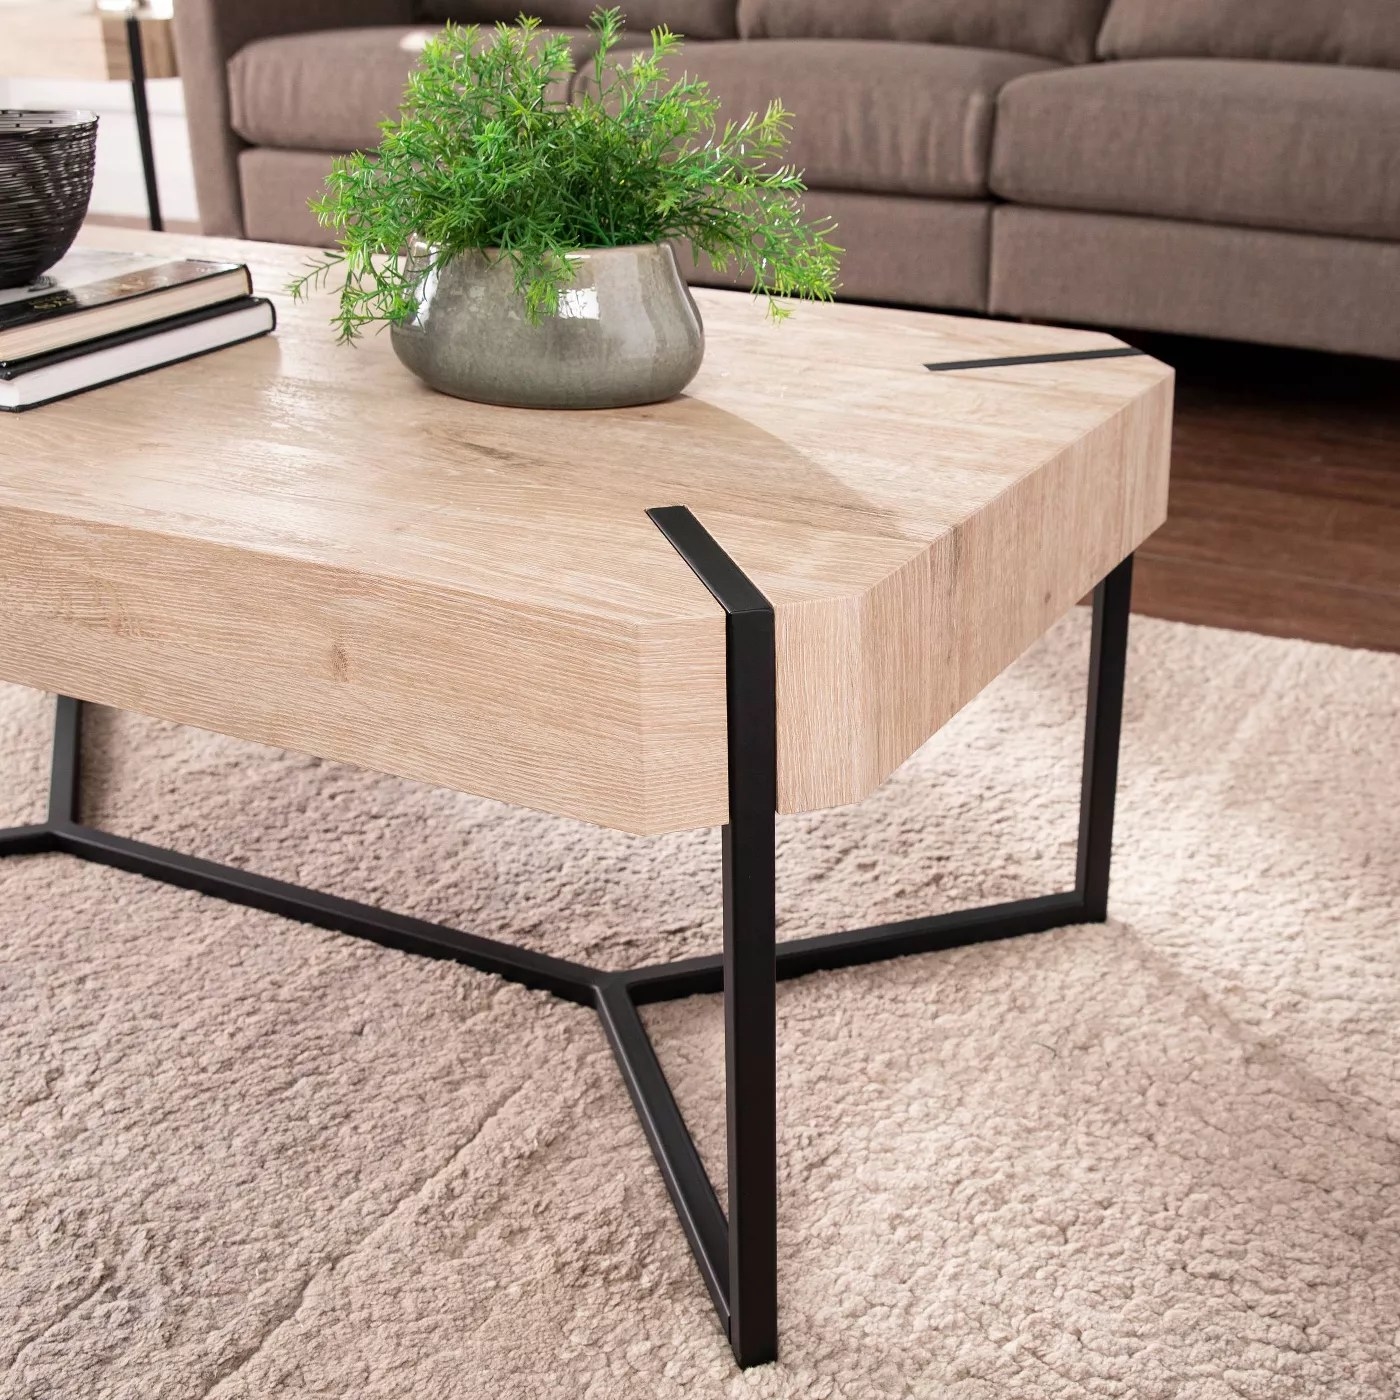 The table with natural wood and a black frame